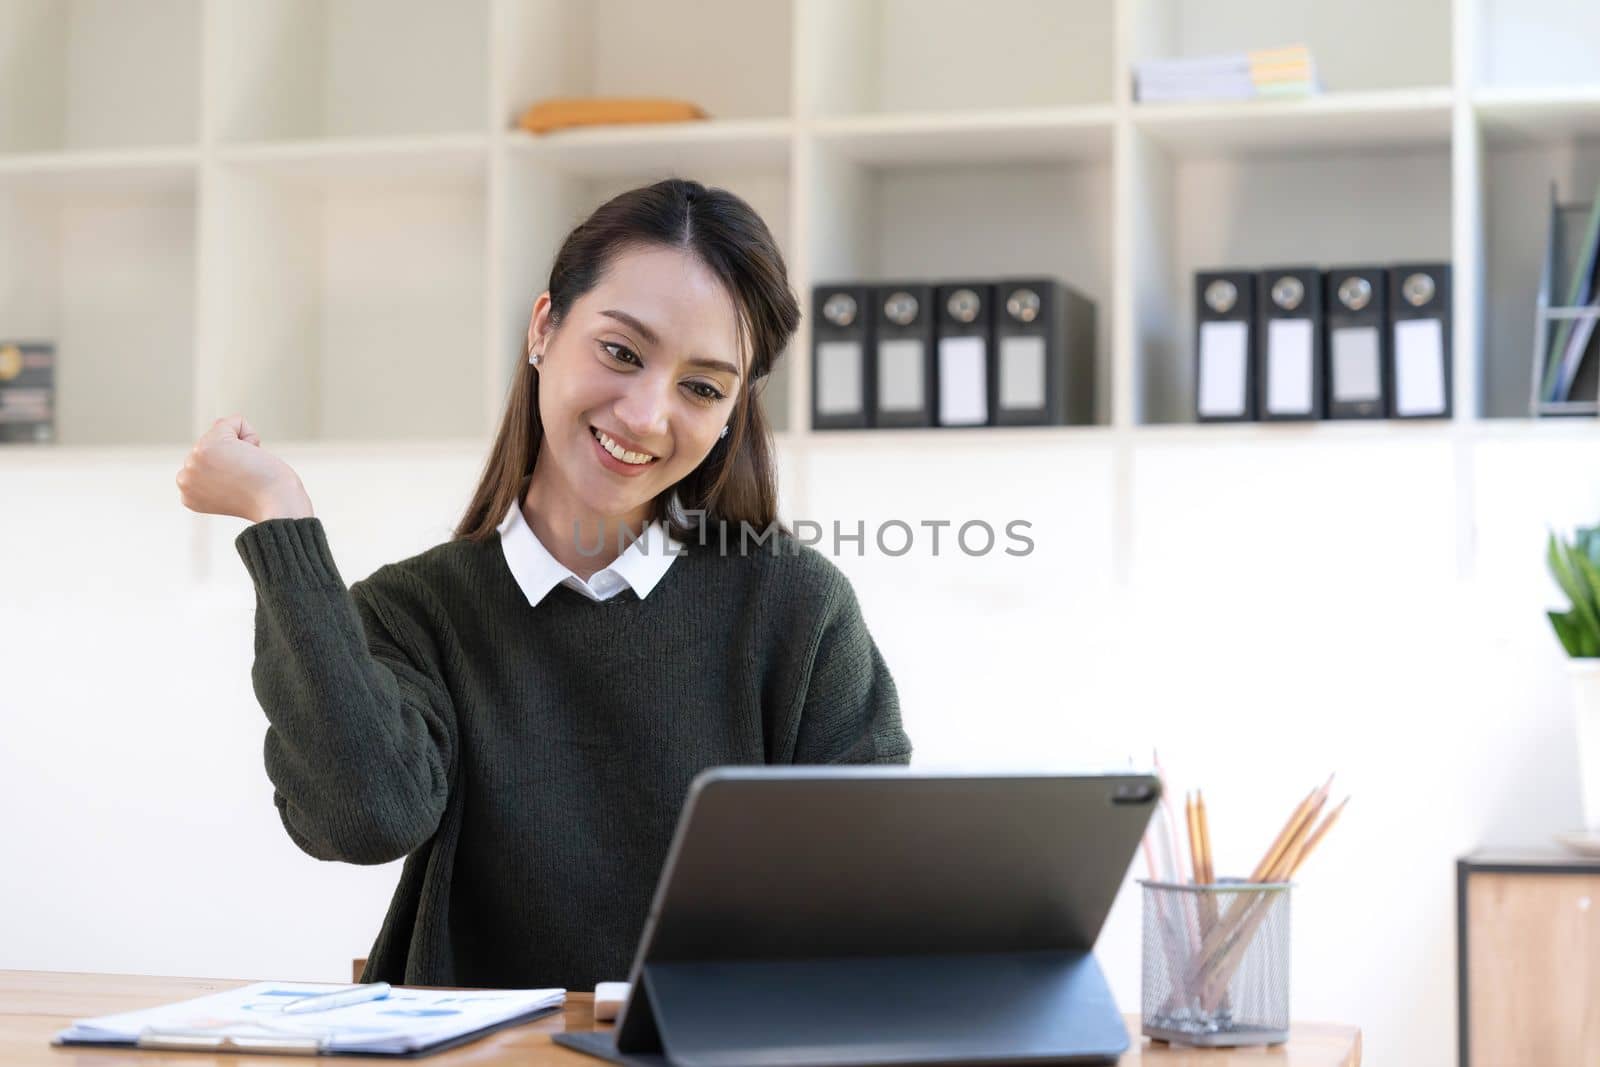 Pretty Asian businesswoman sitting on a laptop And the work came out successfully and the goal was achieved, happy and satisfied with her